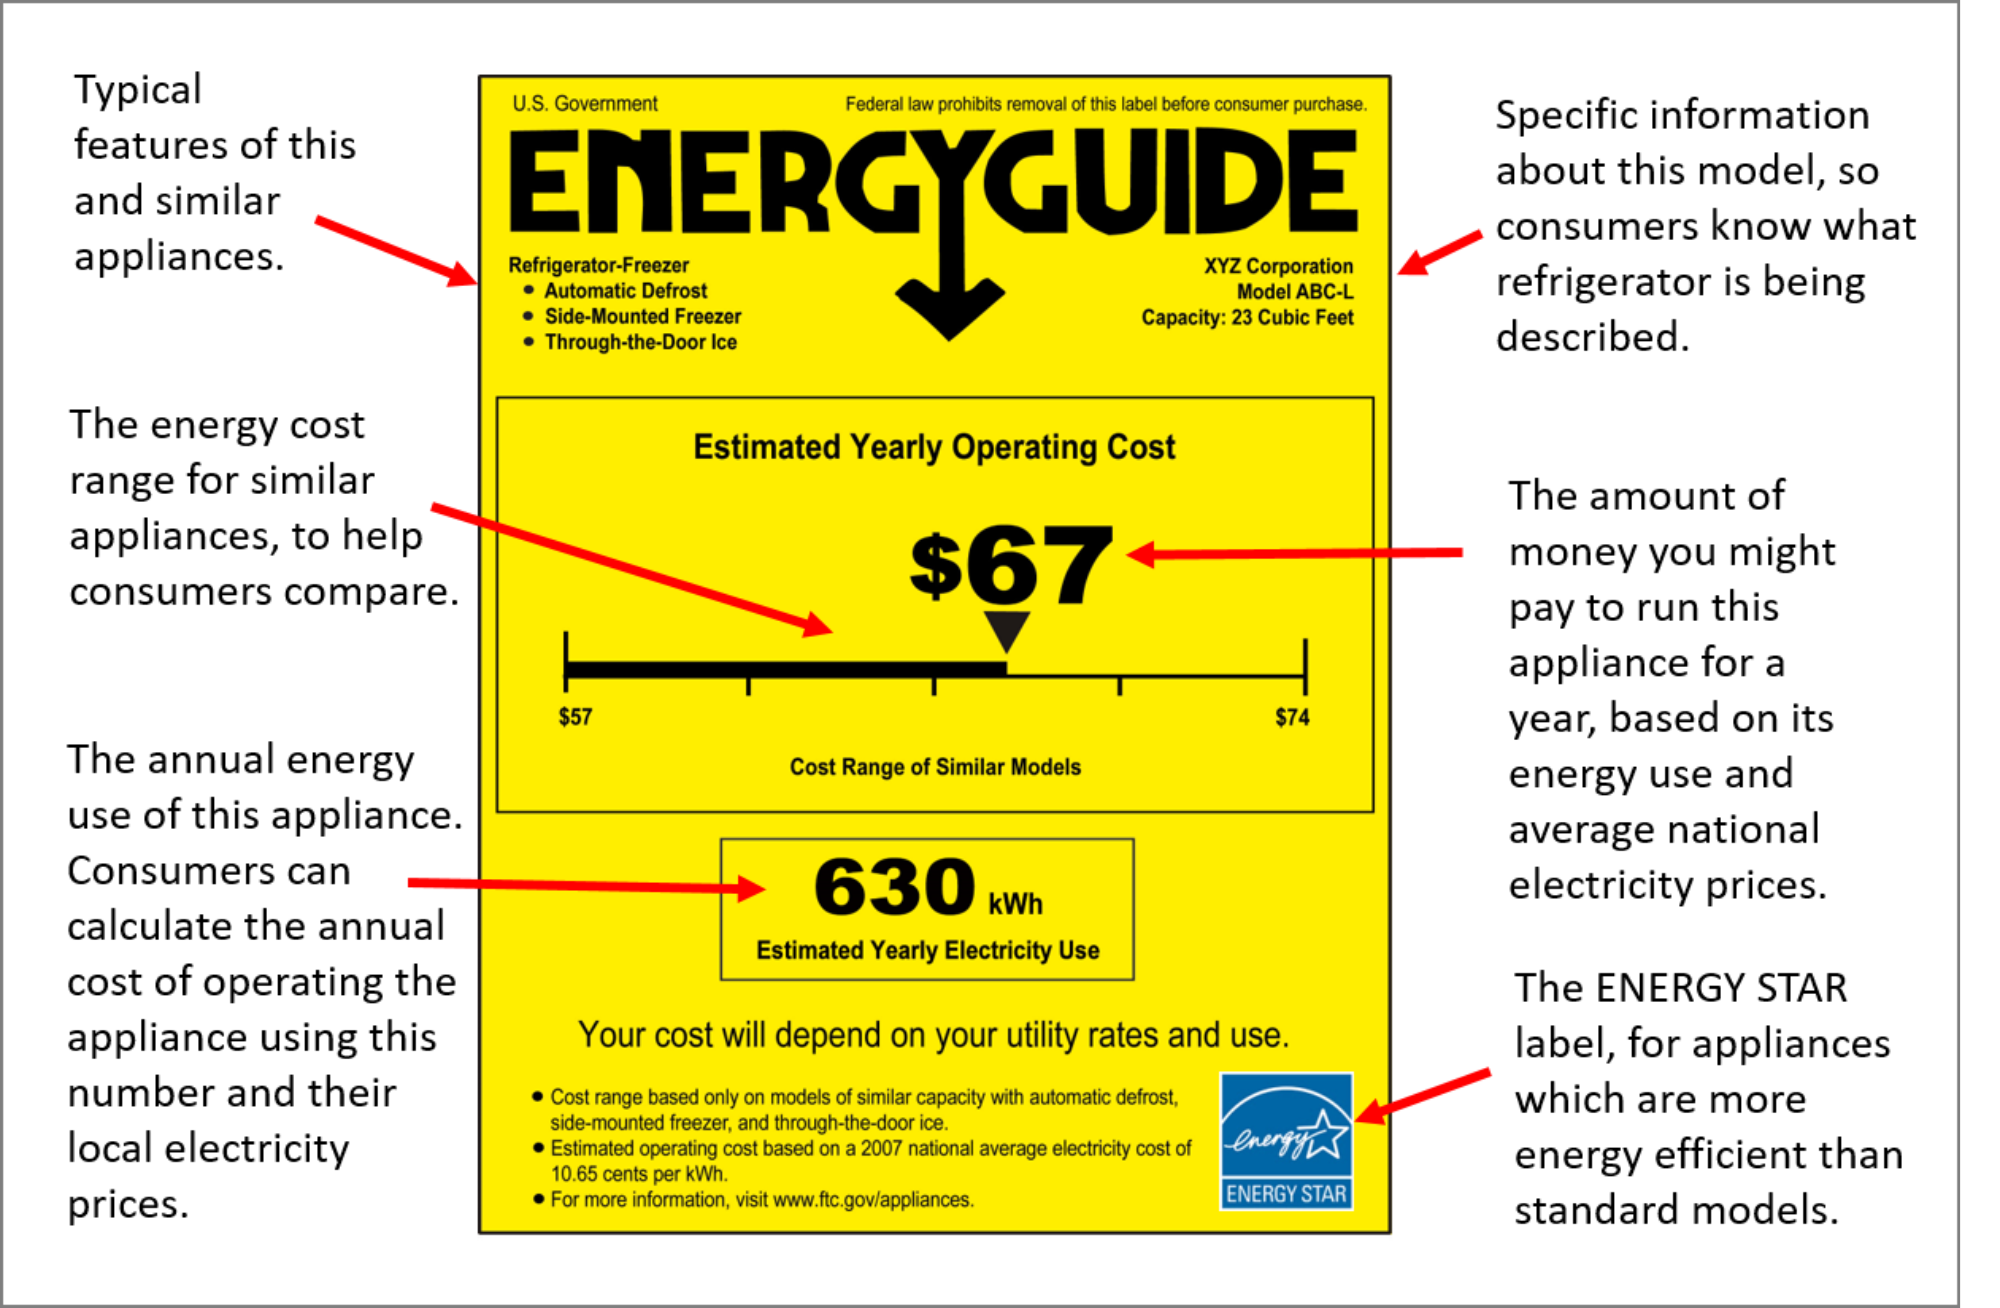 Figure showing the parts of an Energy Guide label for an appliance, and how to read the label.